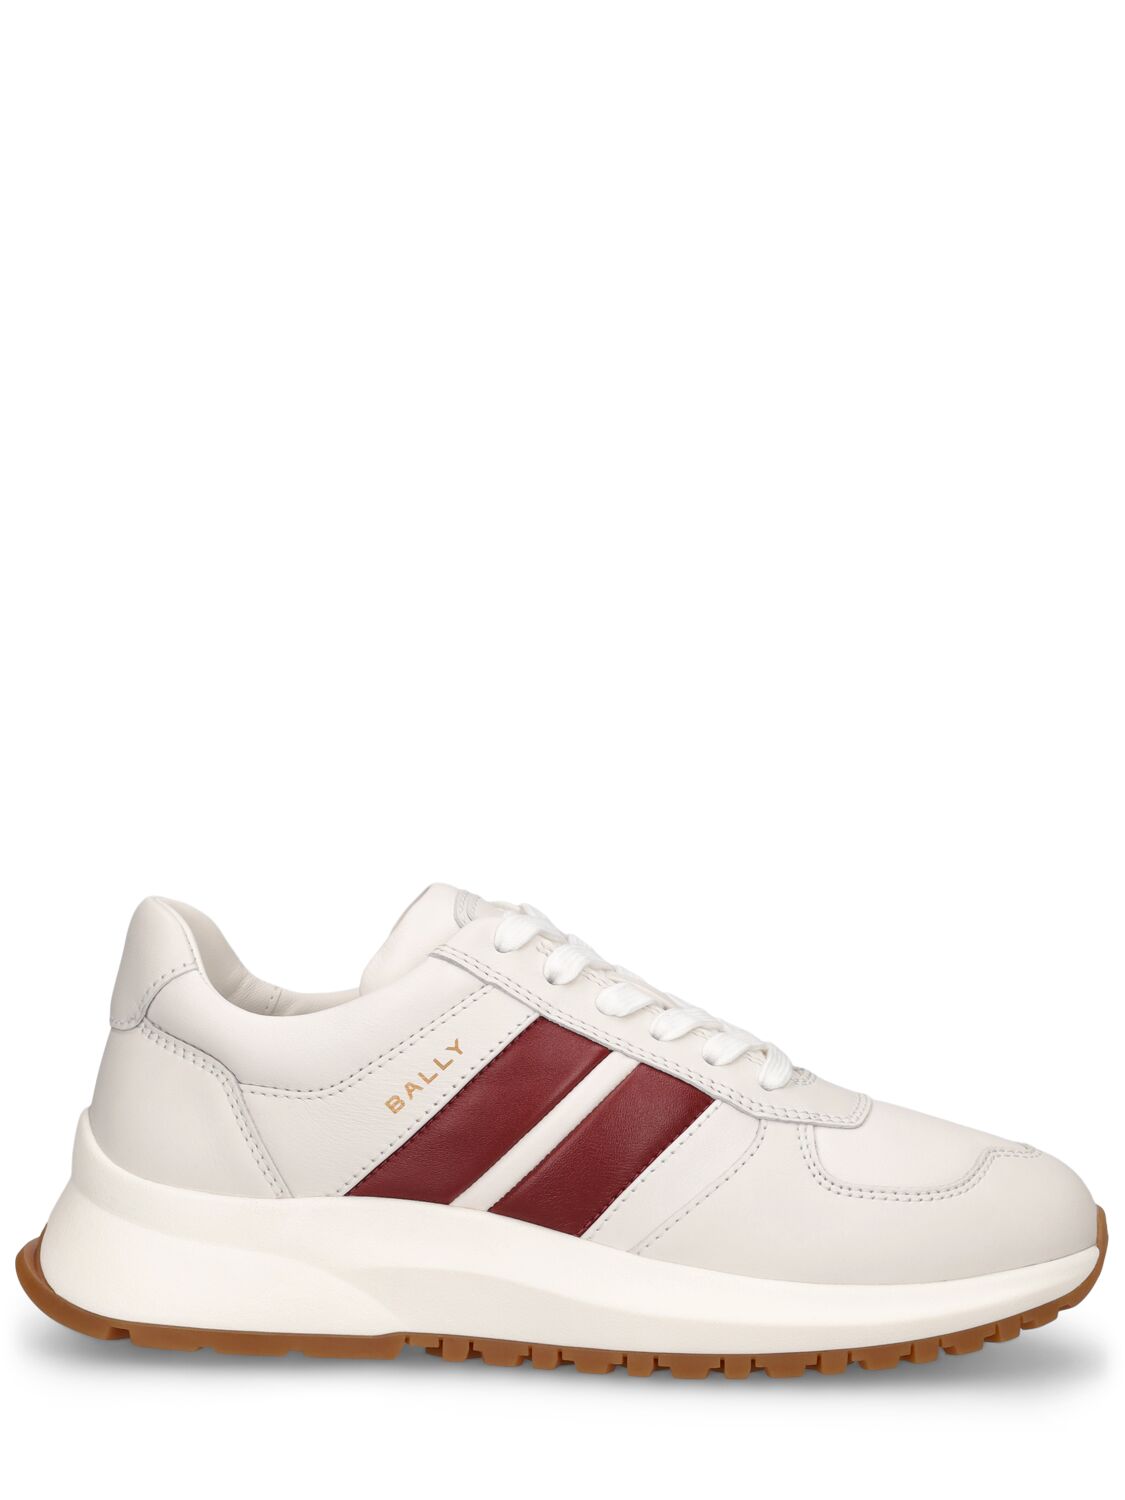 Bally Darsyl Leather Sneakers In White,red